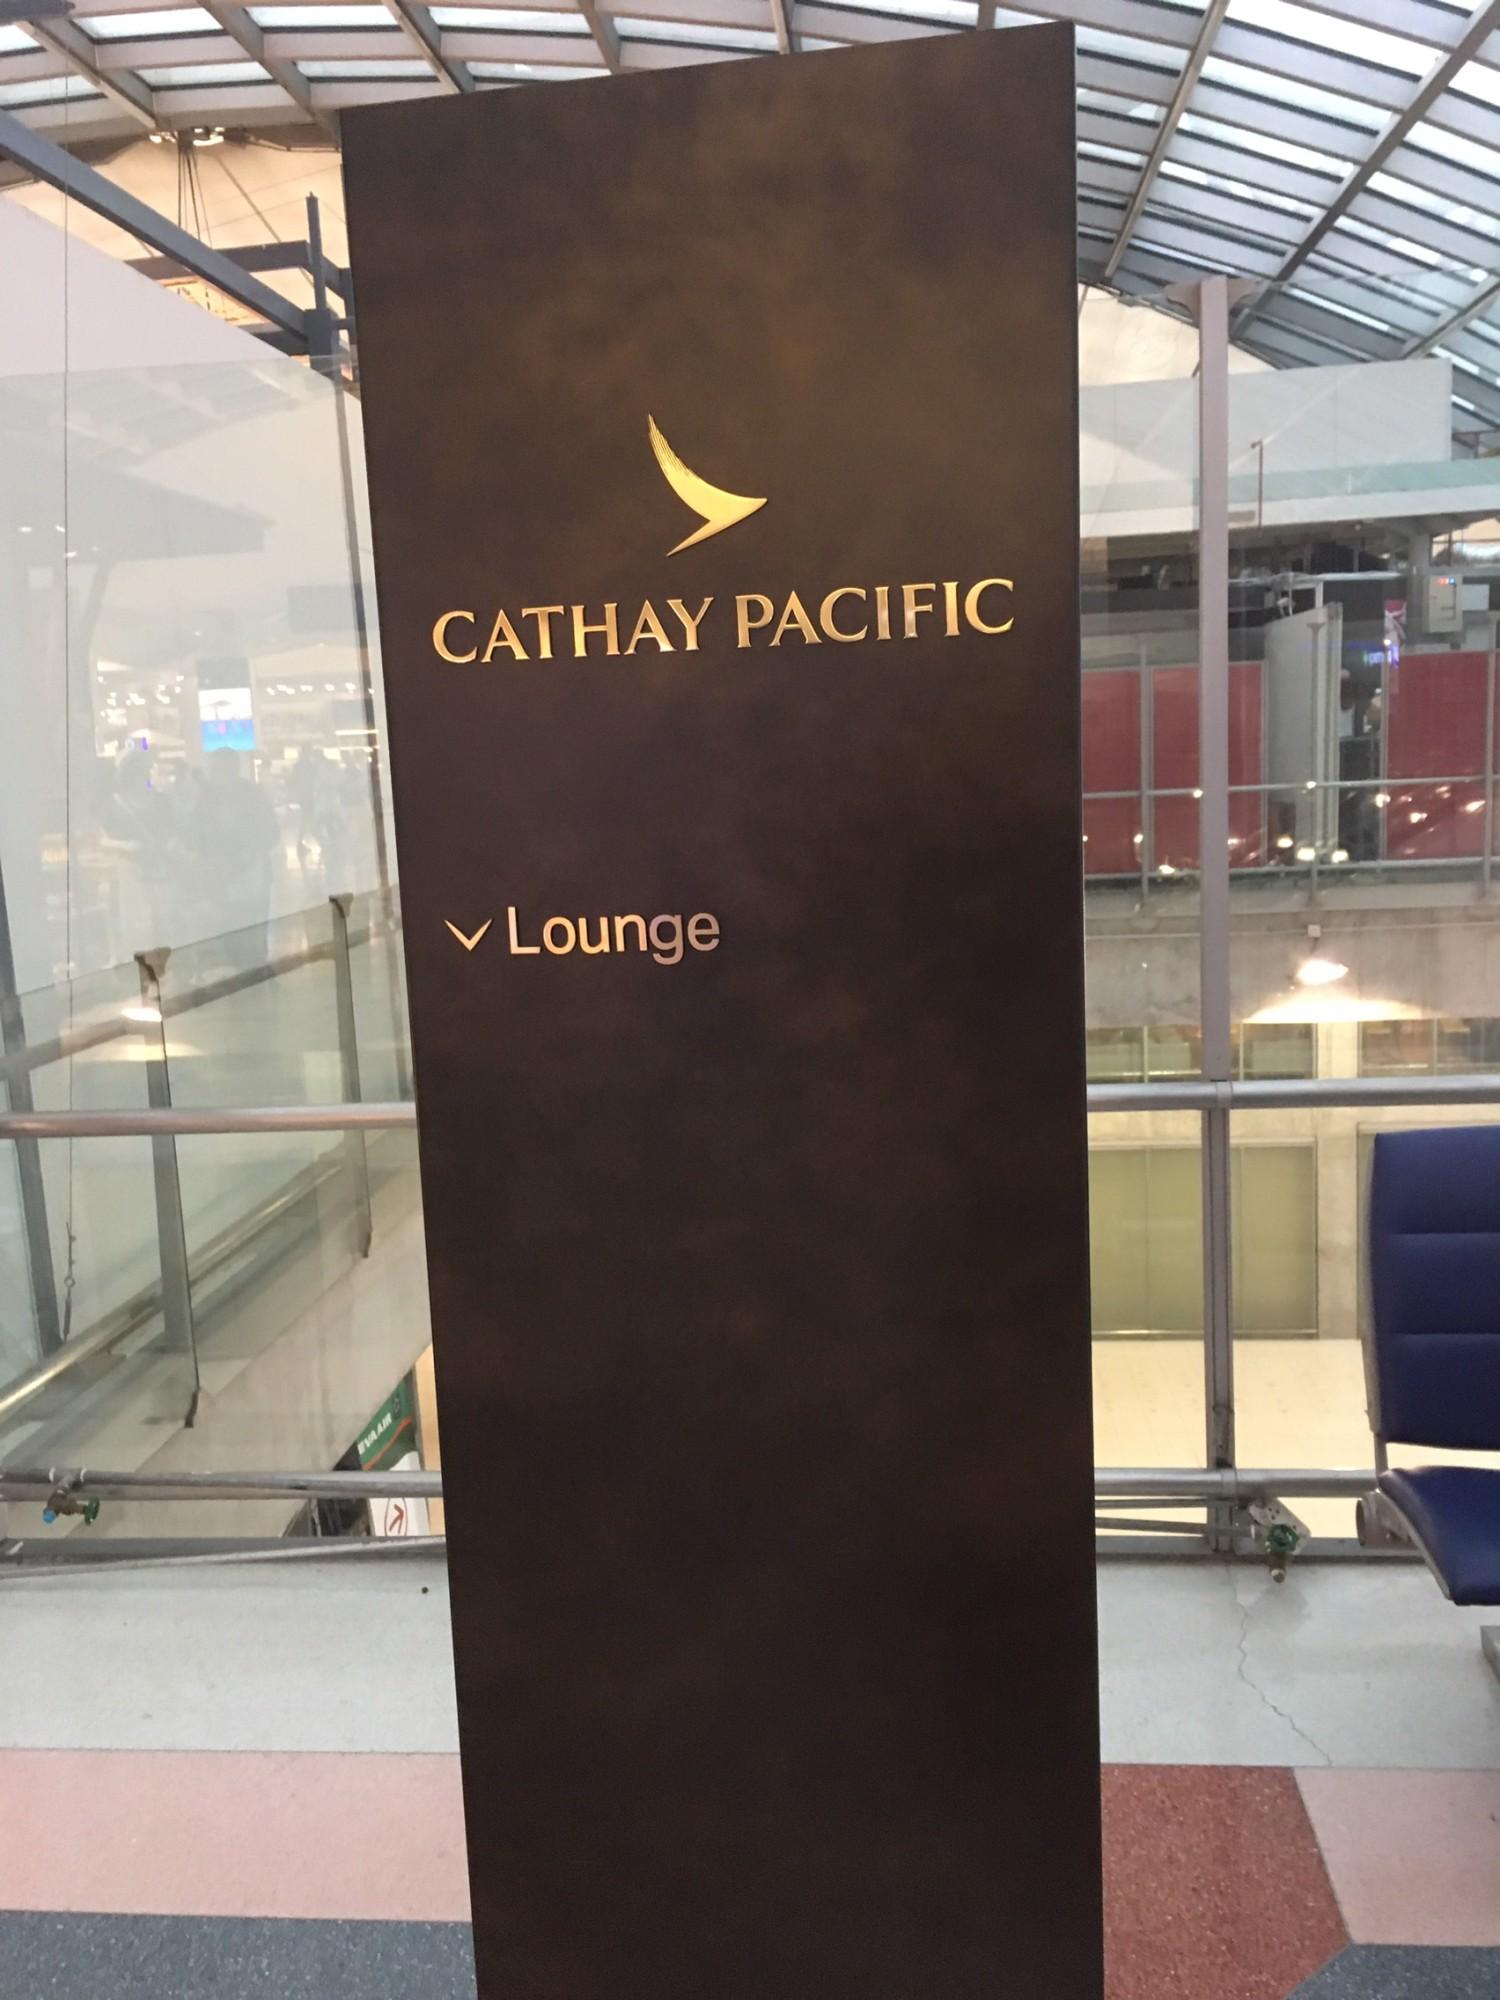 Cathay Pacific First and Business Class Lounge image 56 of 69